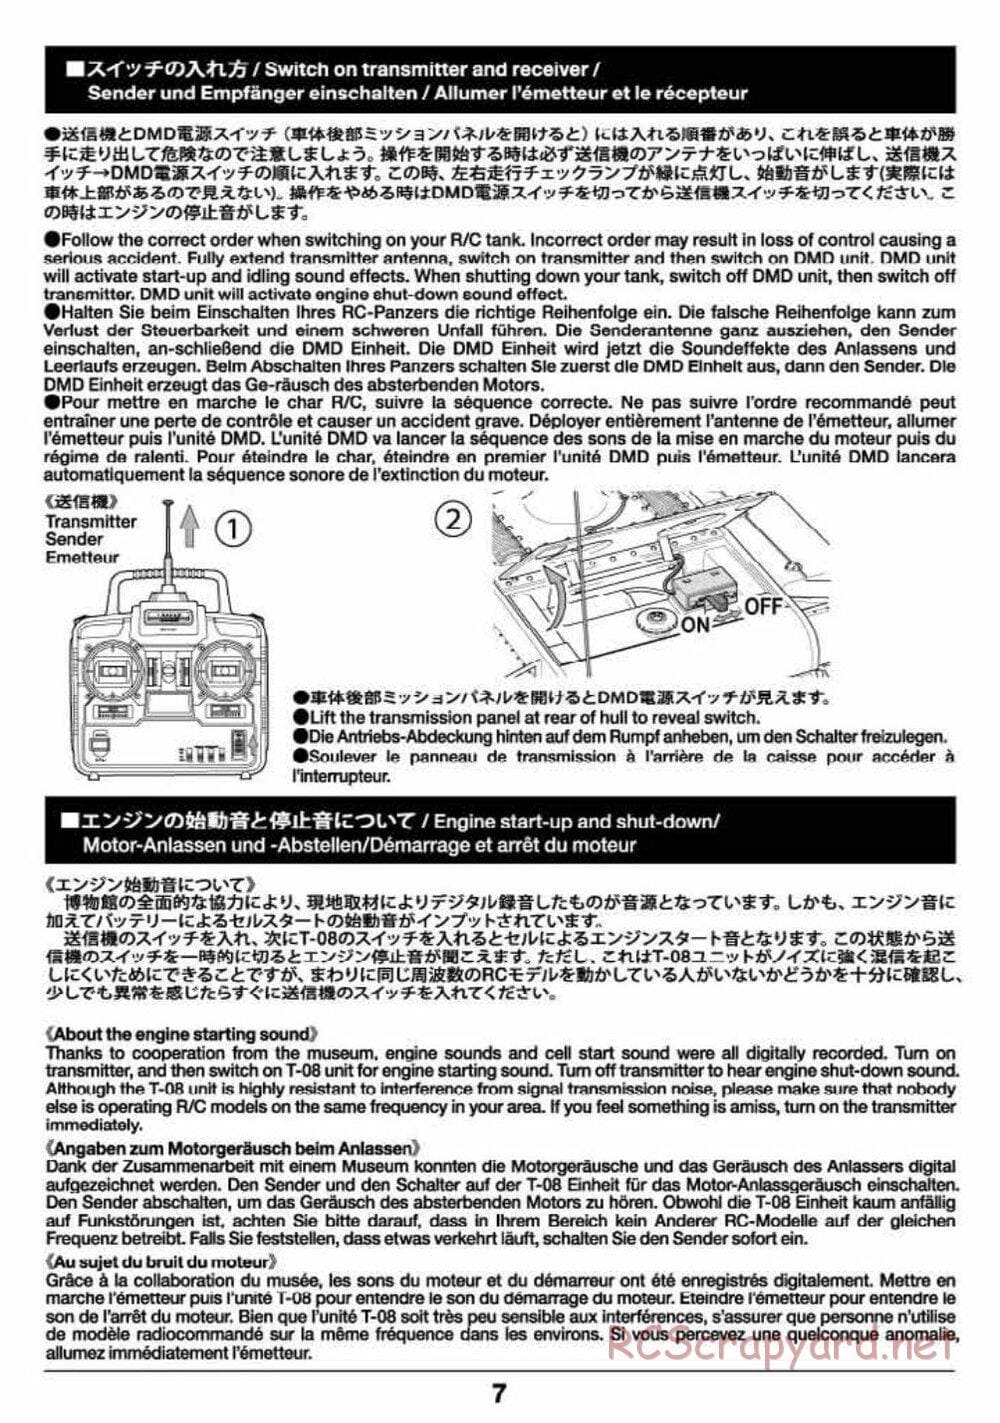 Tamiya - Russian Heavy Tank KV-2 Gigant - 1/16 Scale Chassis - Operation Manual - Page 7